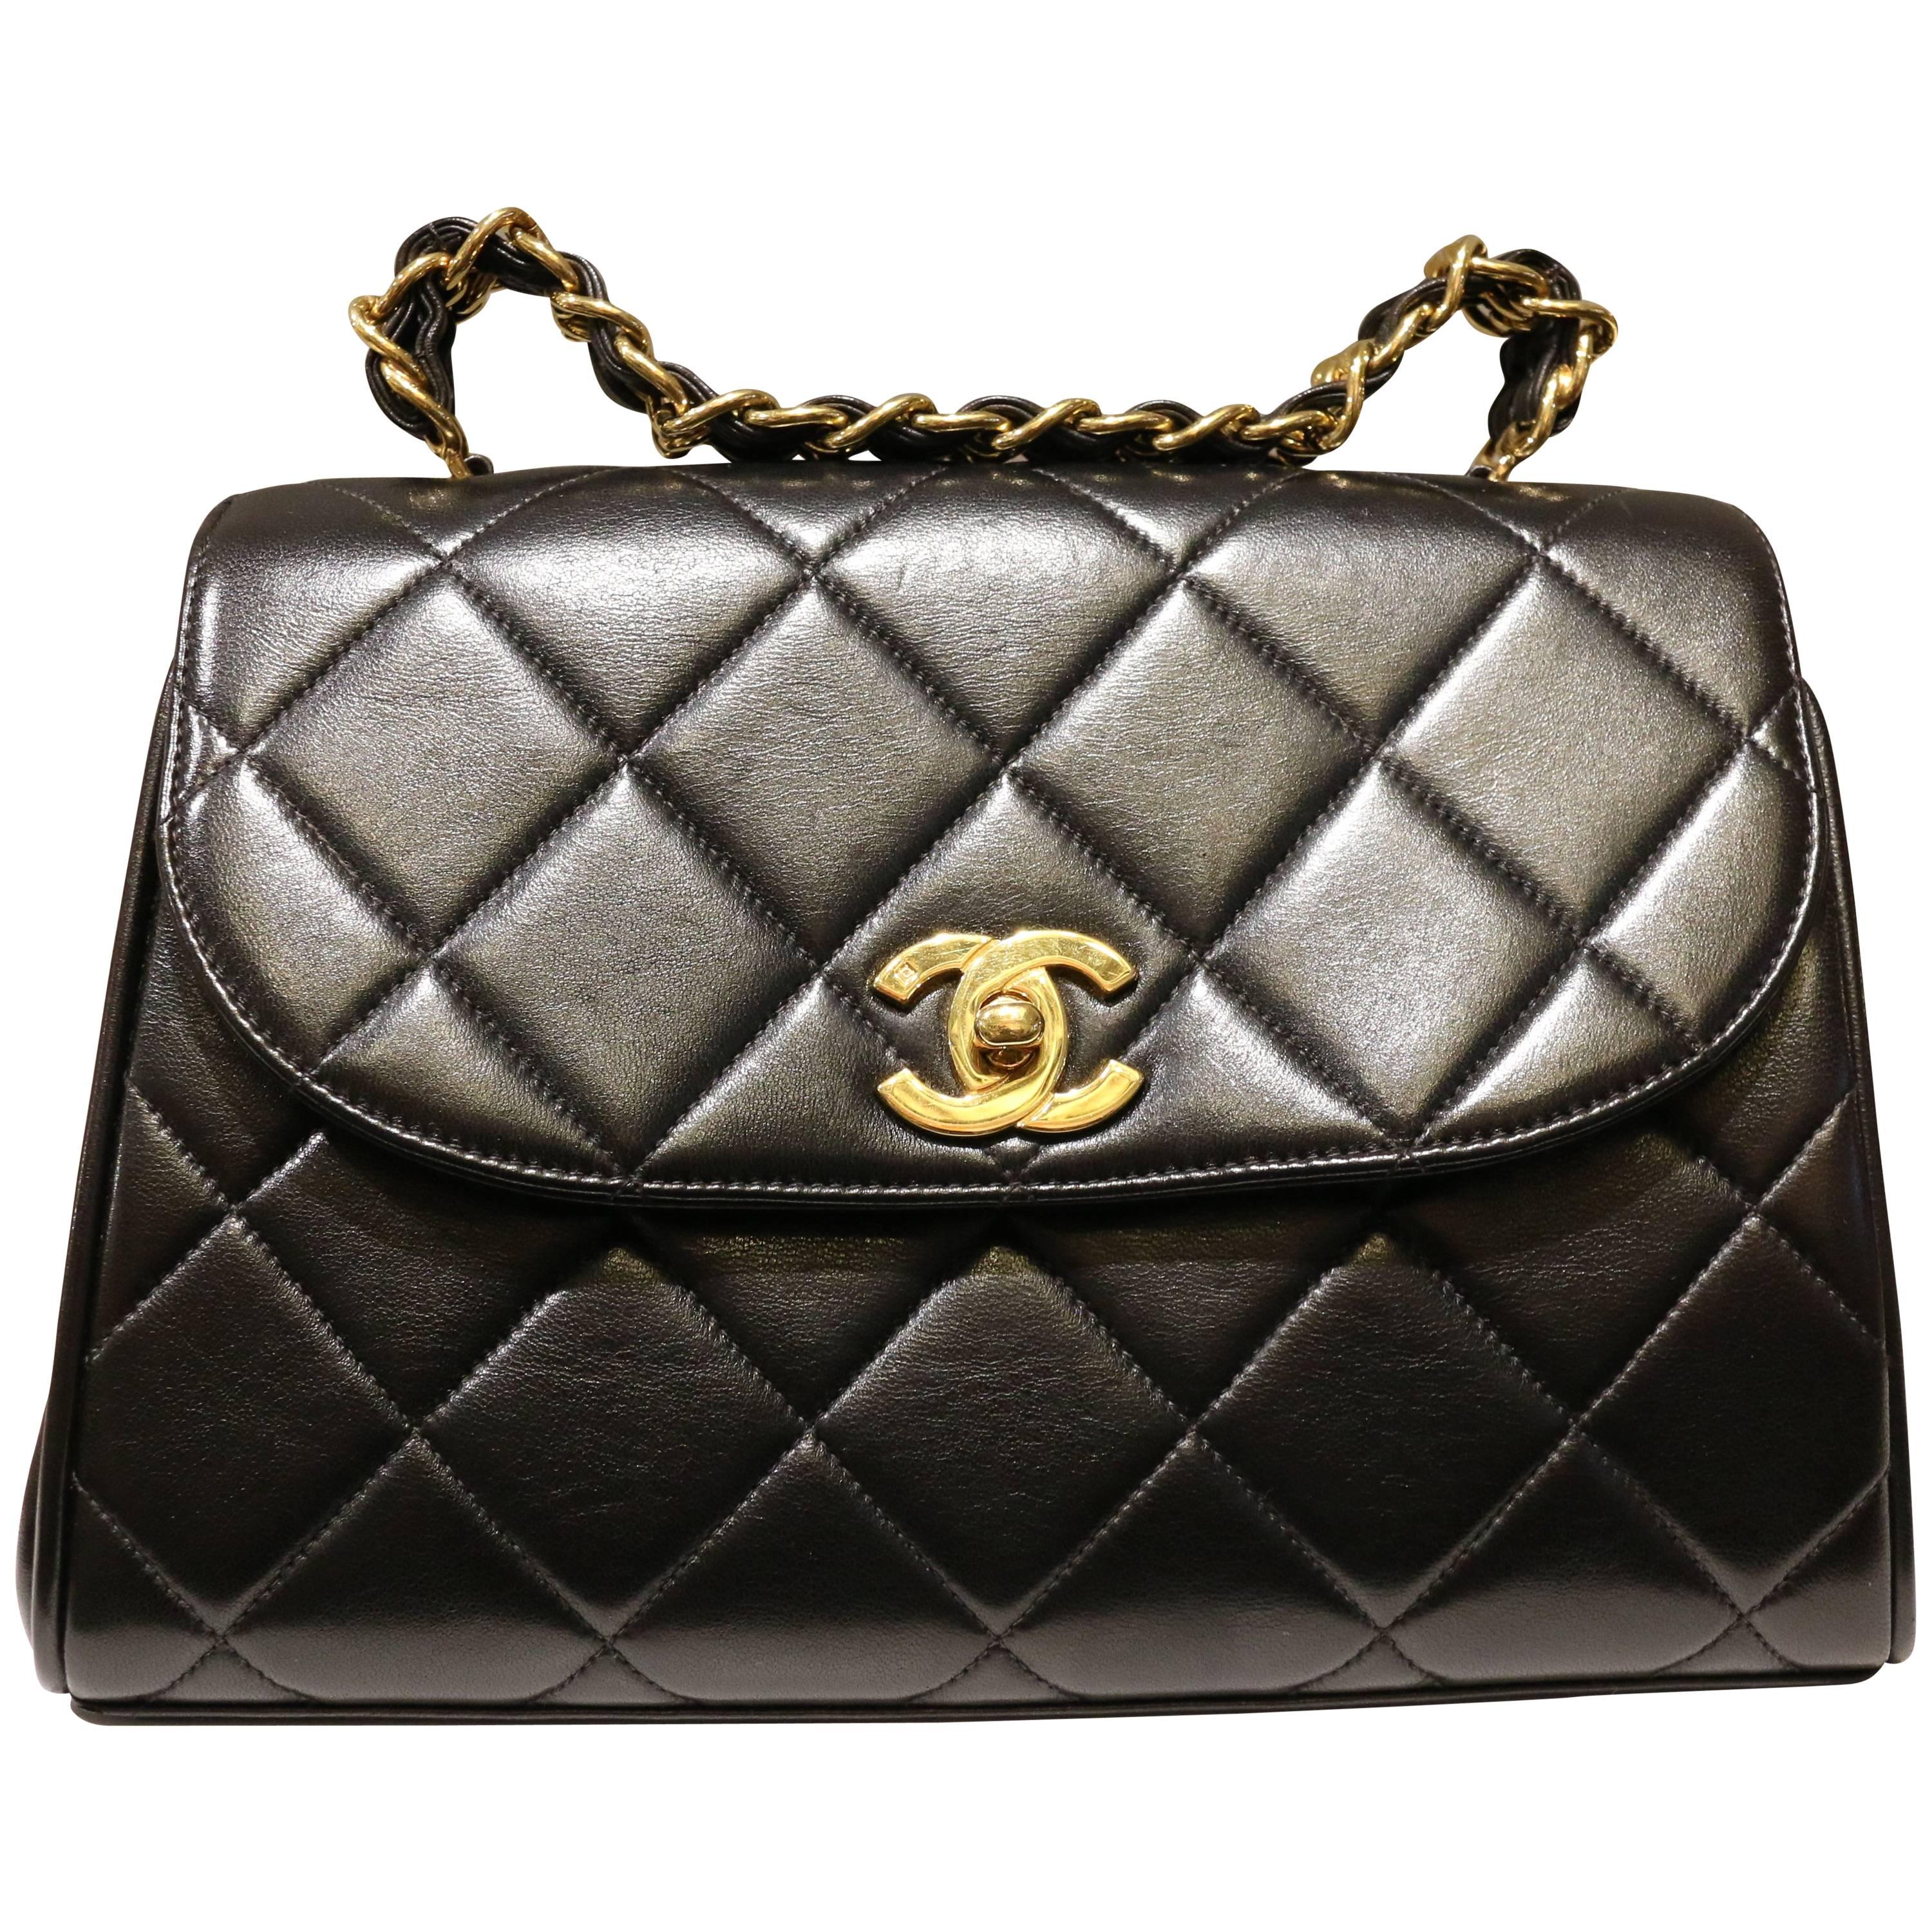 Chanel Classic Black Quilted Lambskin Gold Chain Handle Handbag